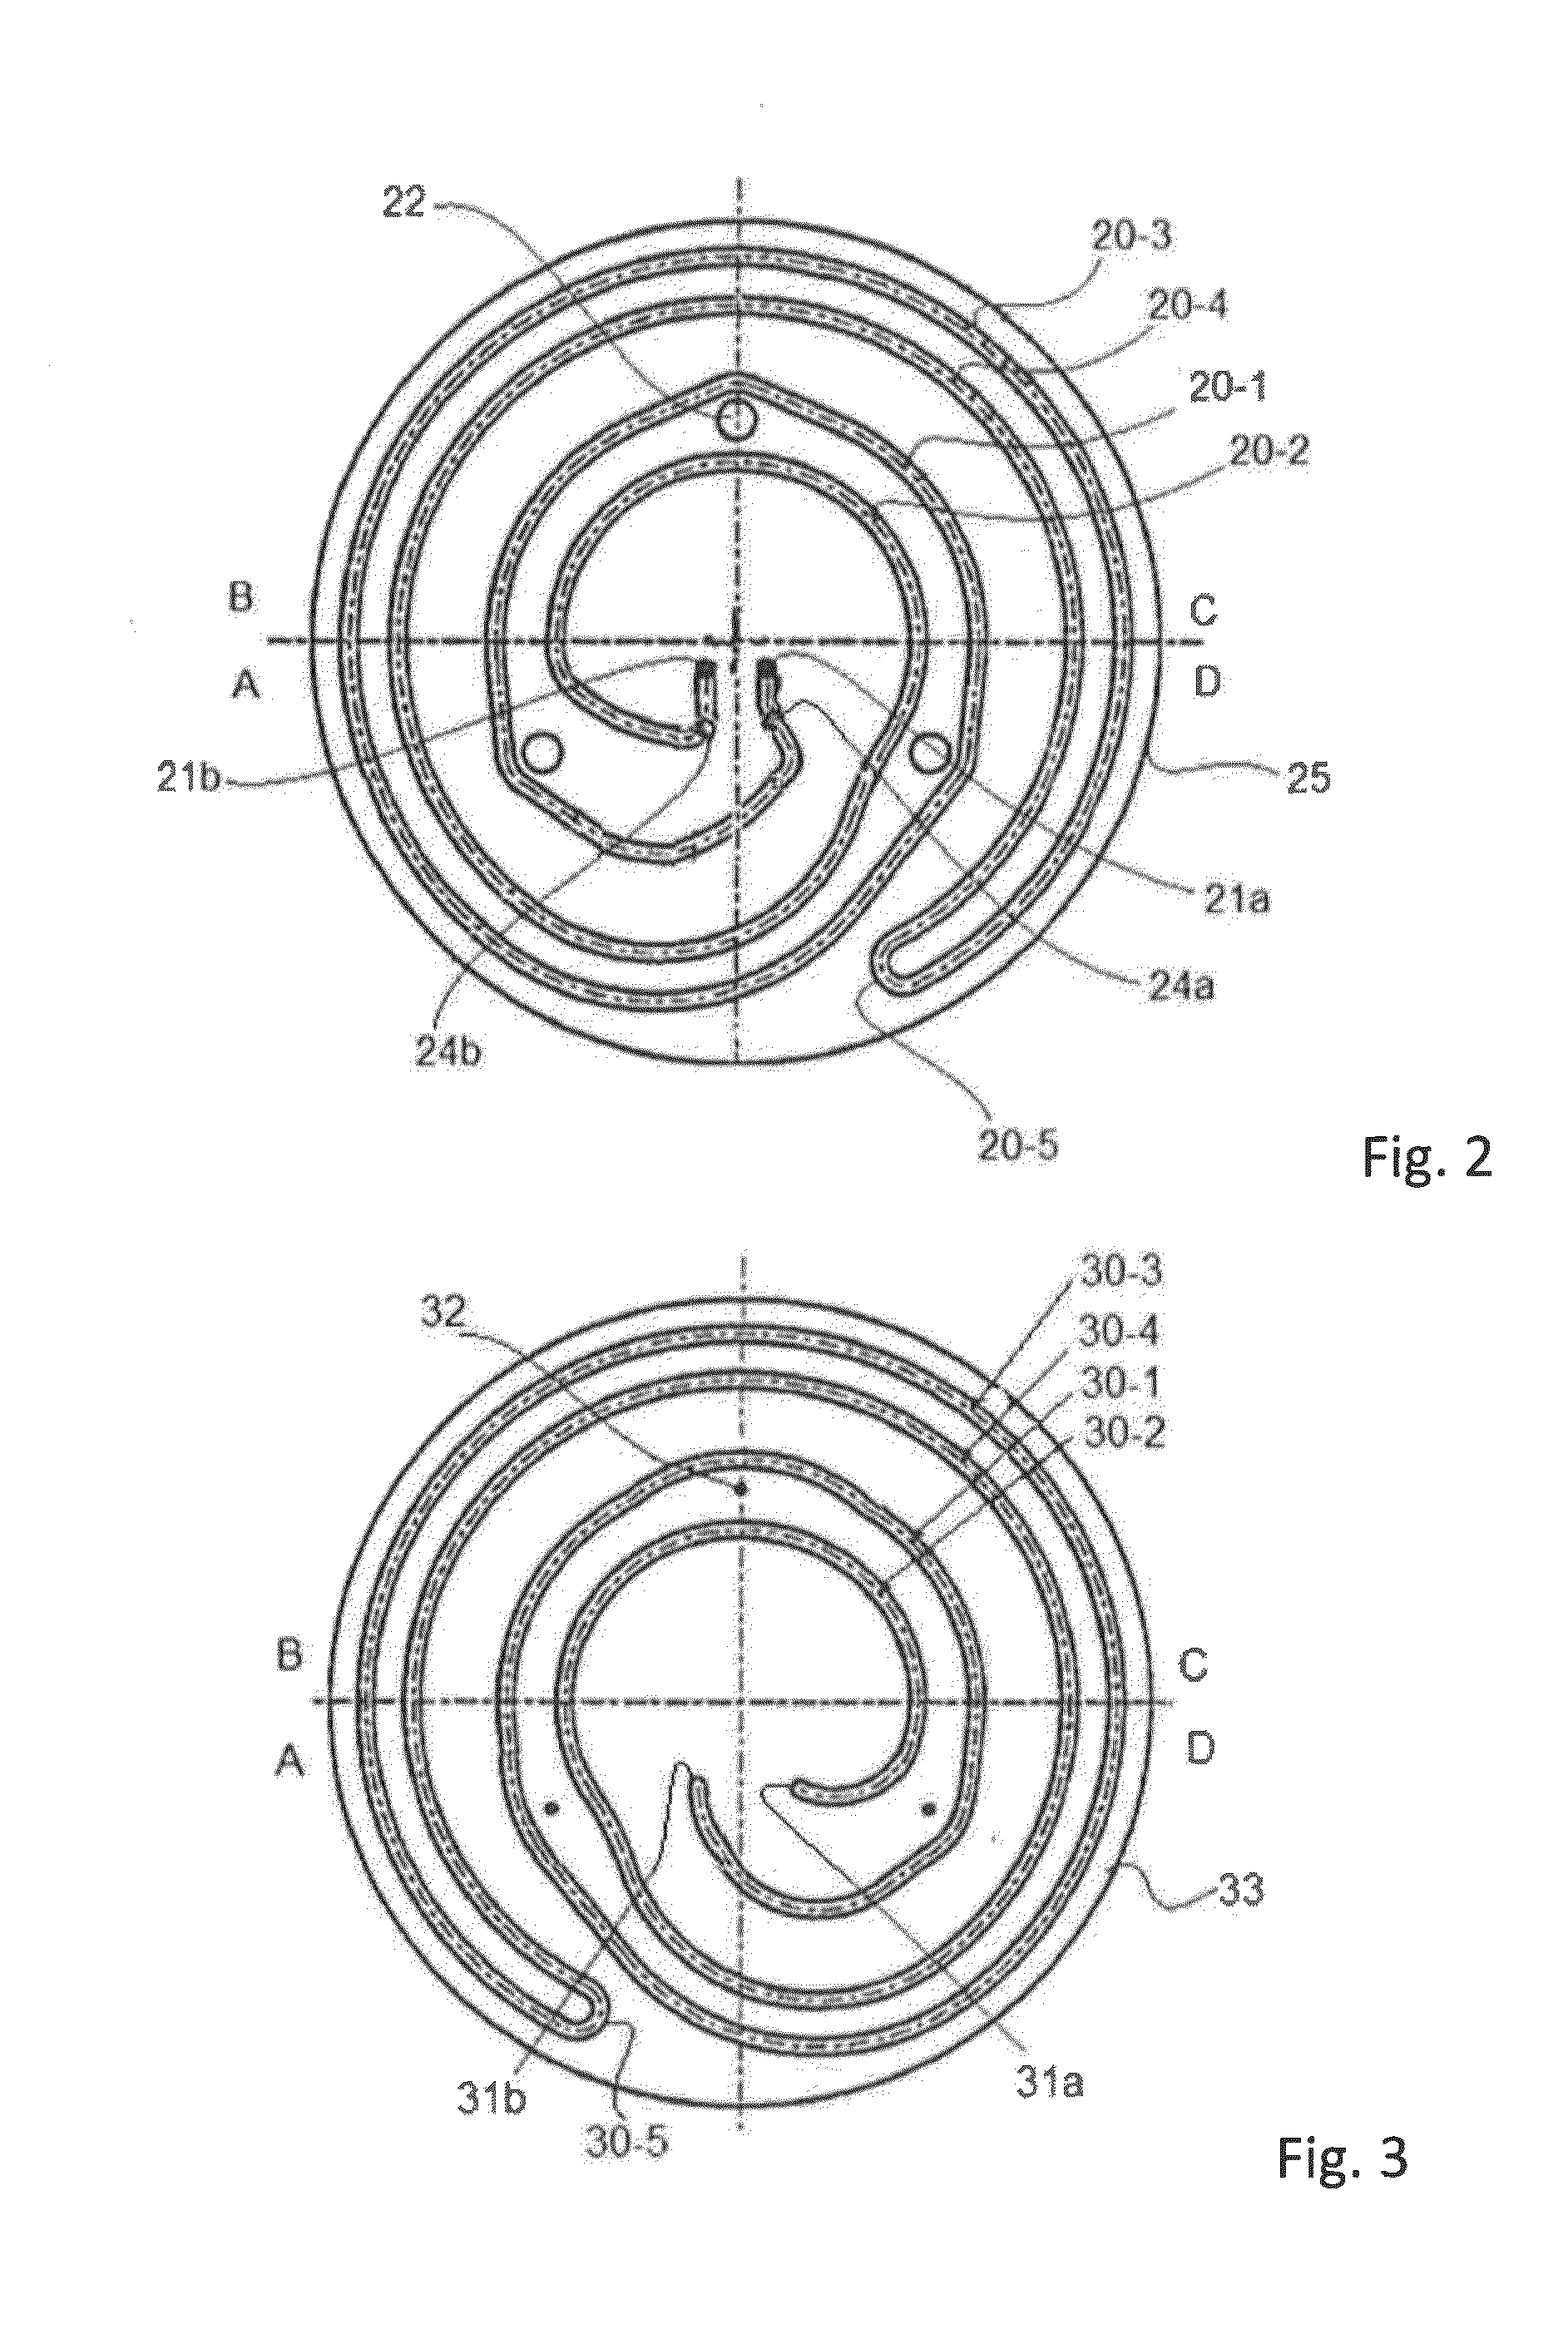 Heating/Cooling Pedestal for Semiconductor-Processing Apparatus